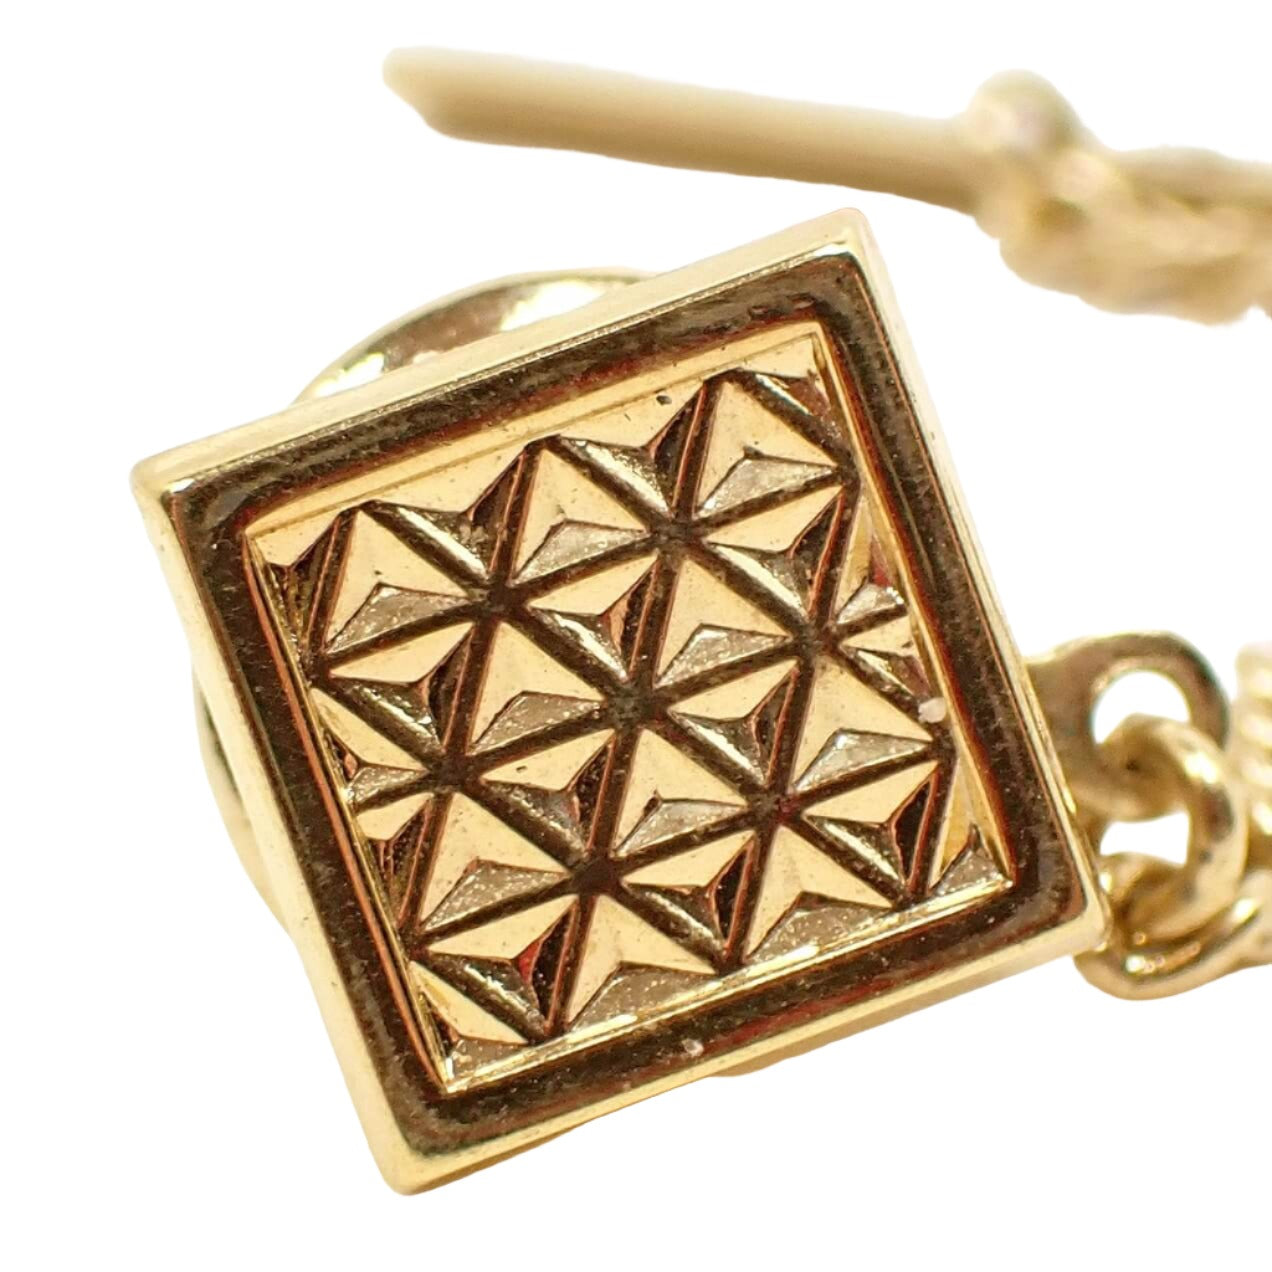 Enlarged front view of the retro vintage geometric tie tack. It is square shaped with gold tone plated color metal. There is a raised triangle pattern all across the front.